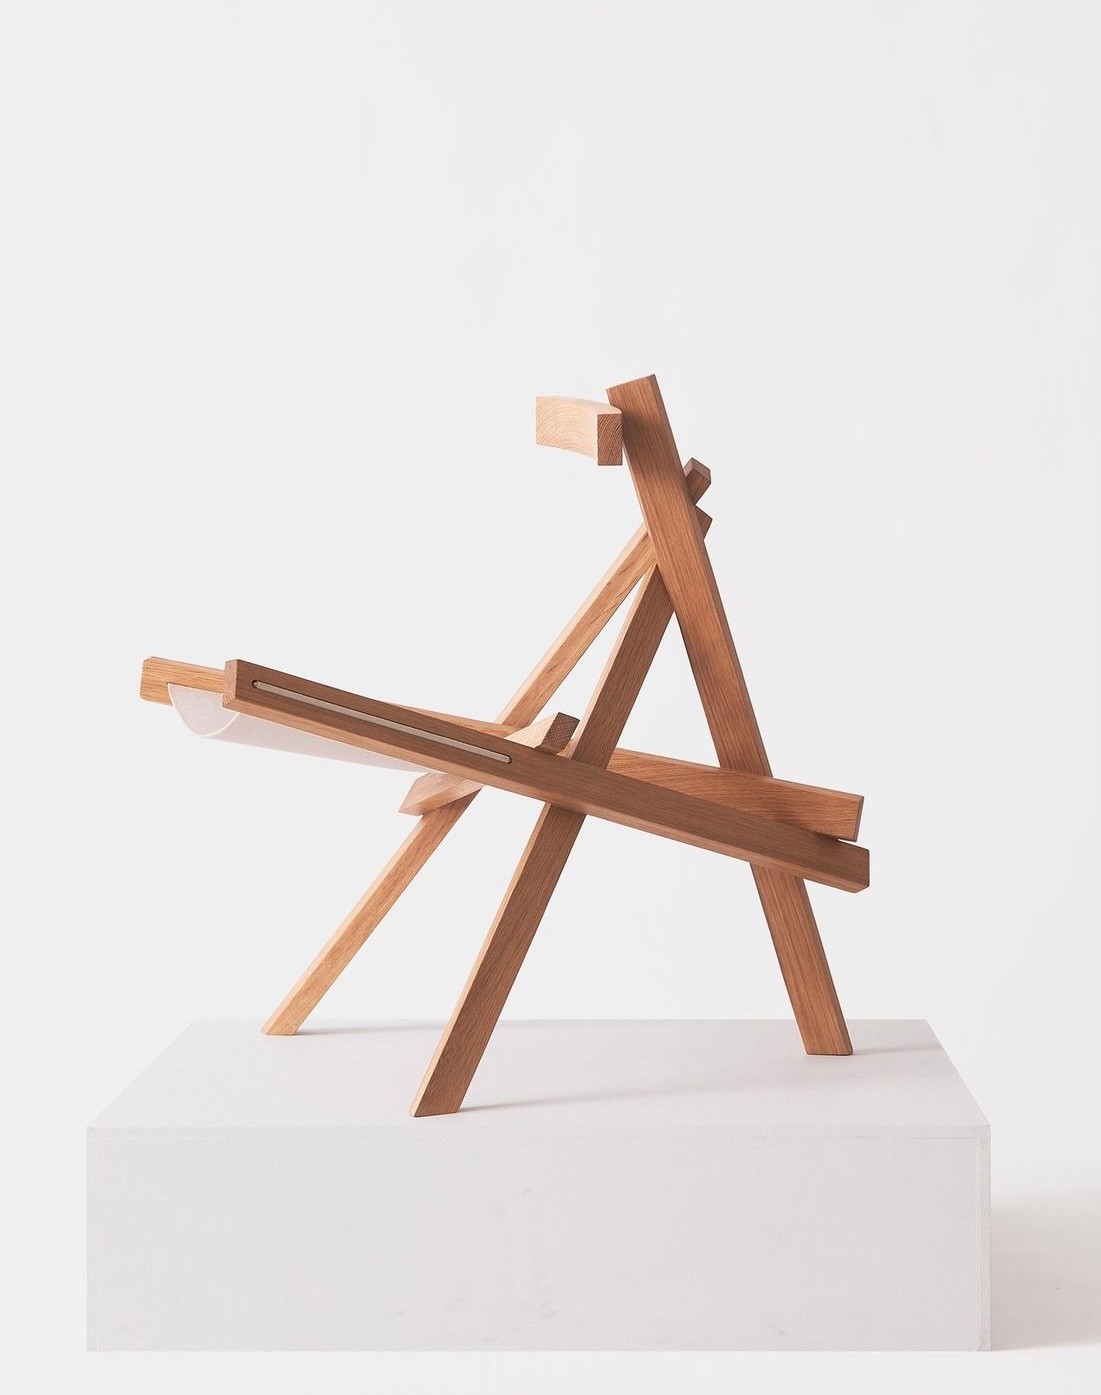 Chair by Amos Huber